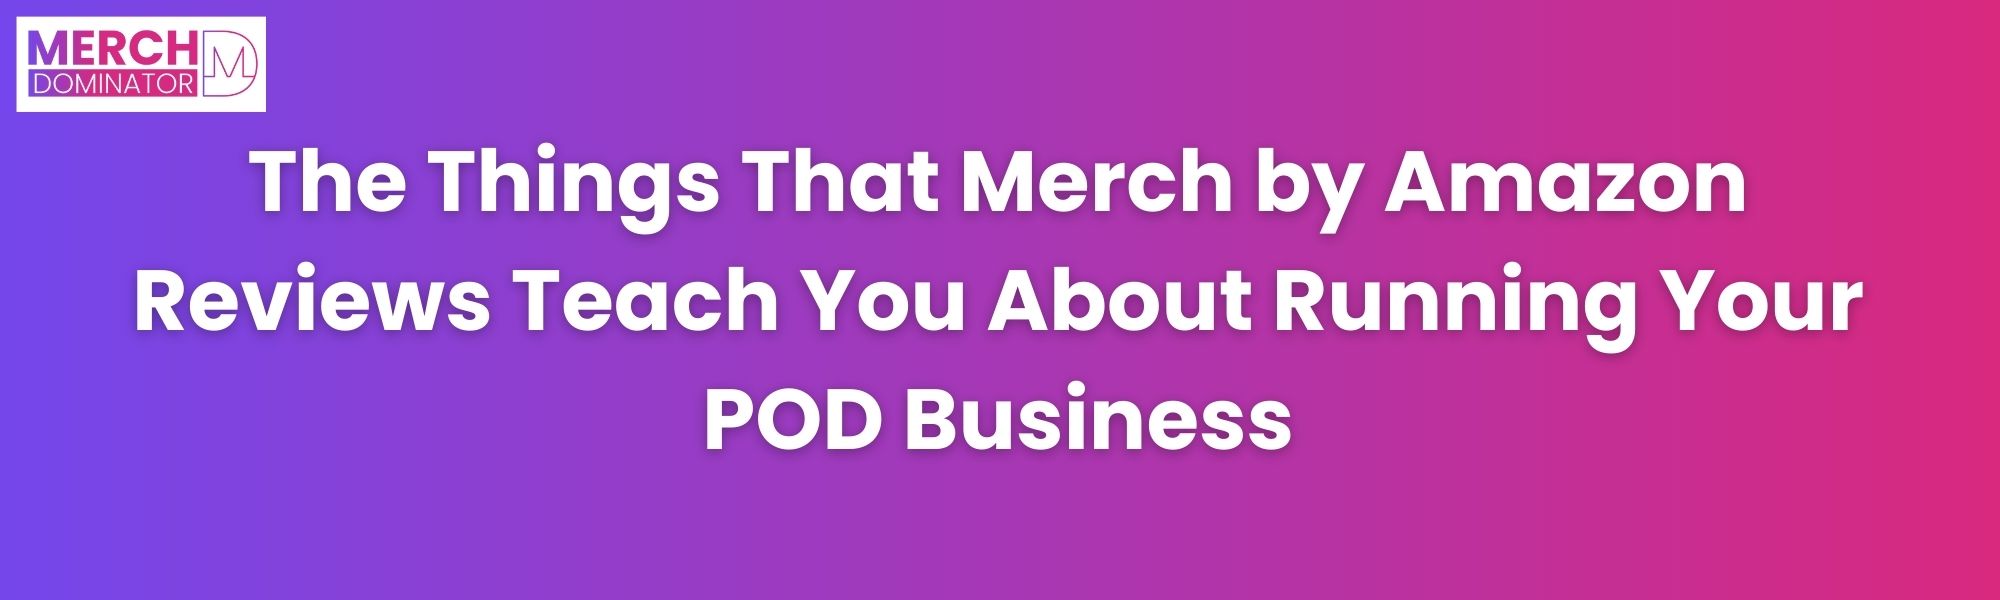 Importance Of Merch by Amazon Reviews To Run POD Business